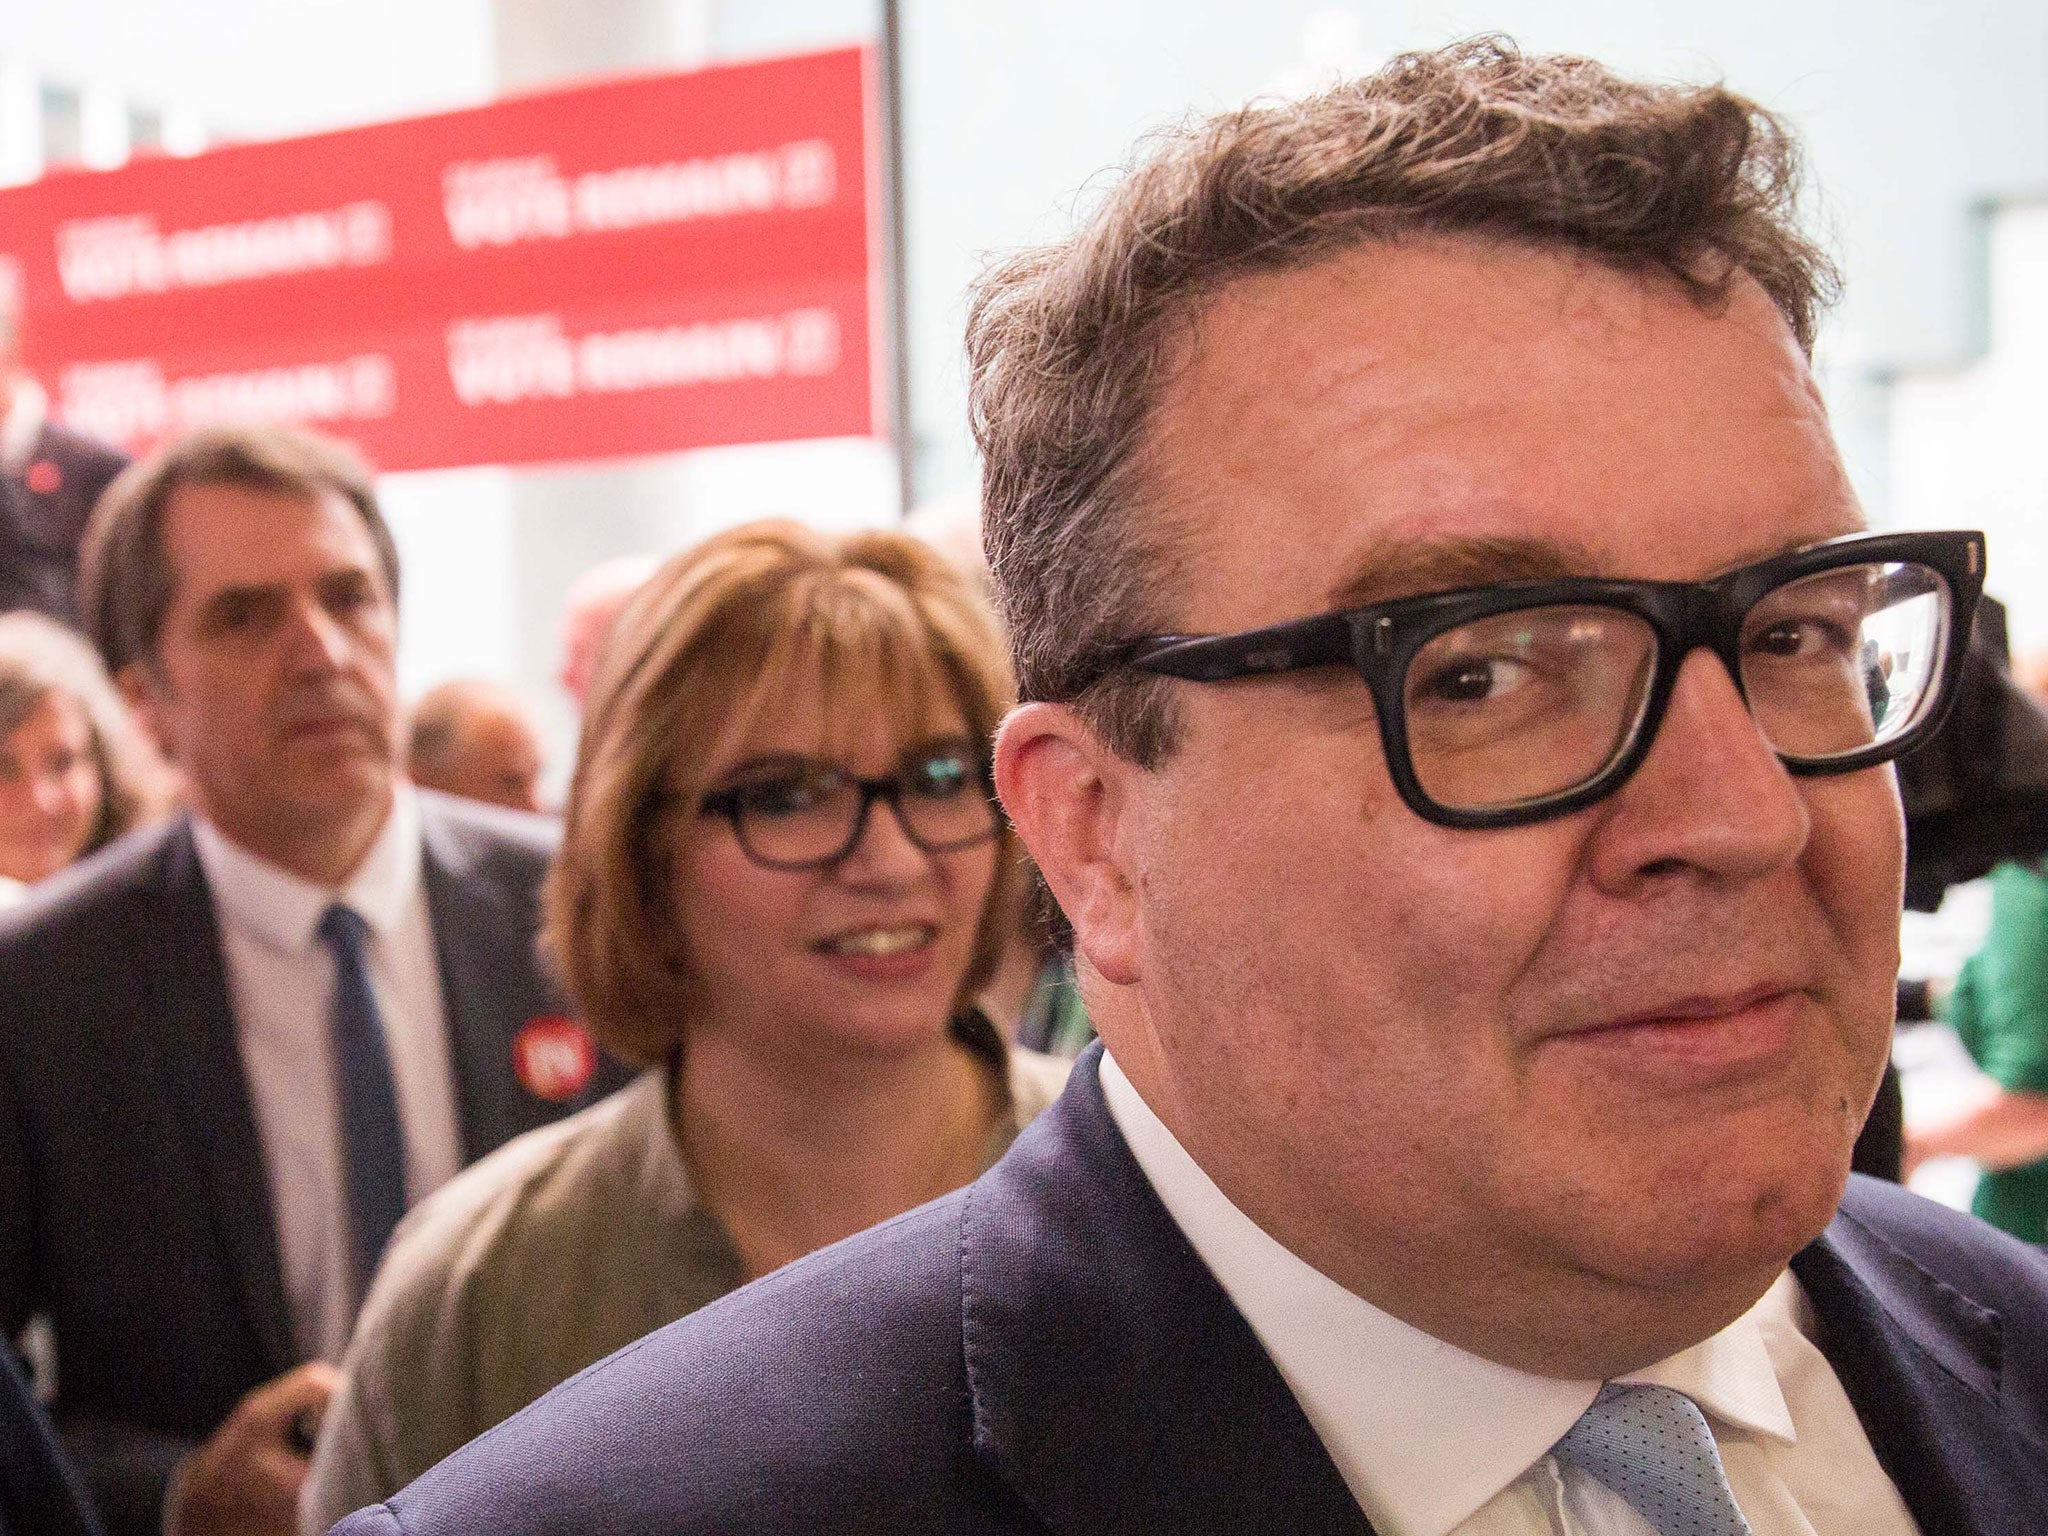 Tom Watson, Deputy Leader of the Labour Party, walks off stage at a Labour In for Britain event at the TUC Congress Hall on June 14, 2016 in London, England.